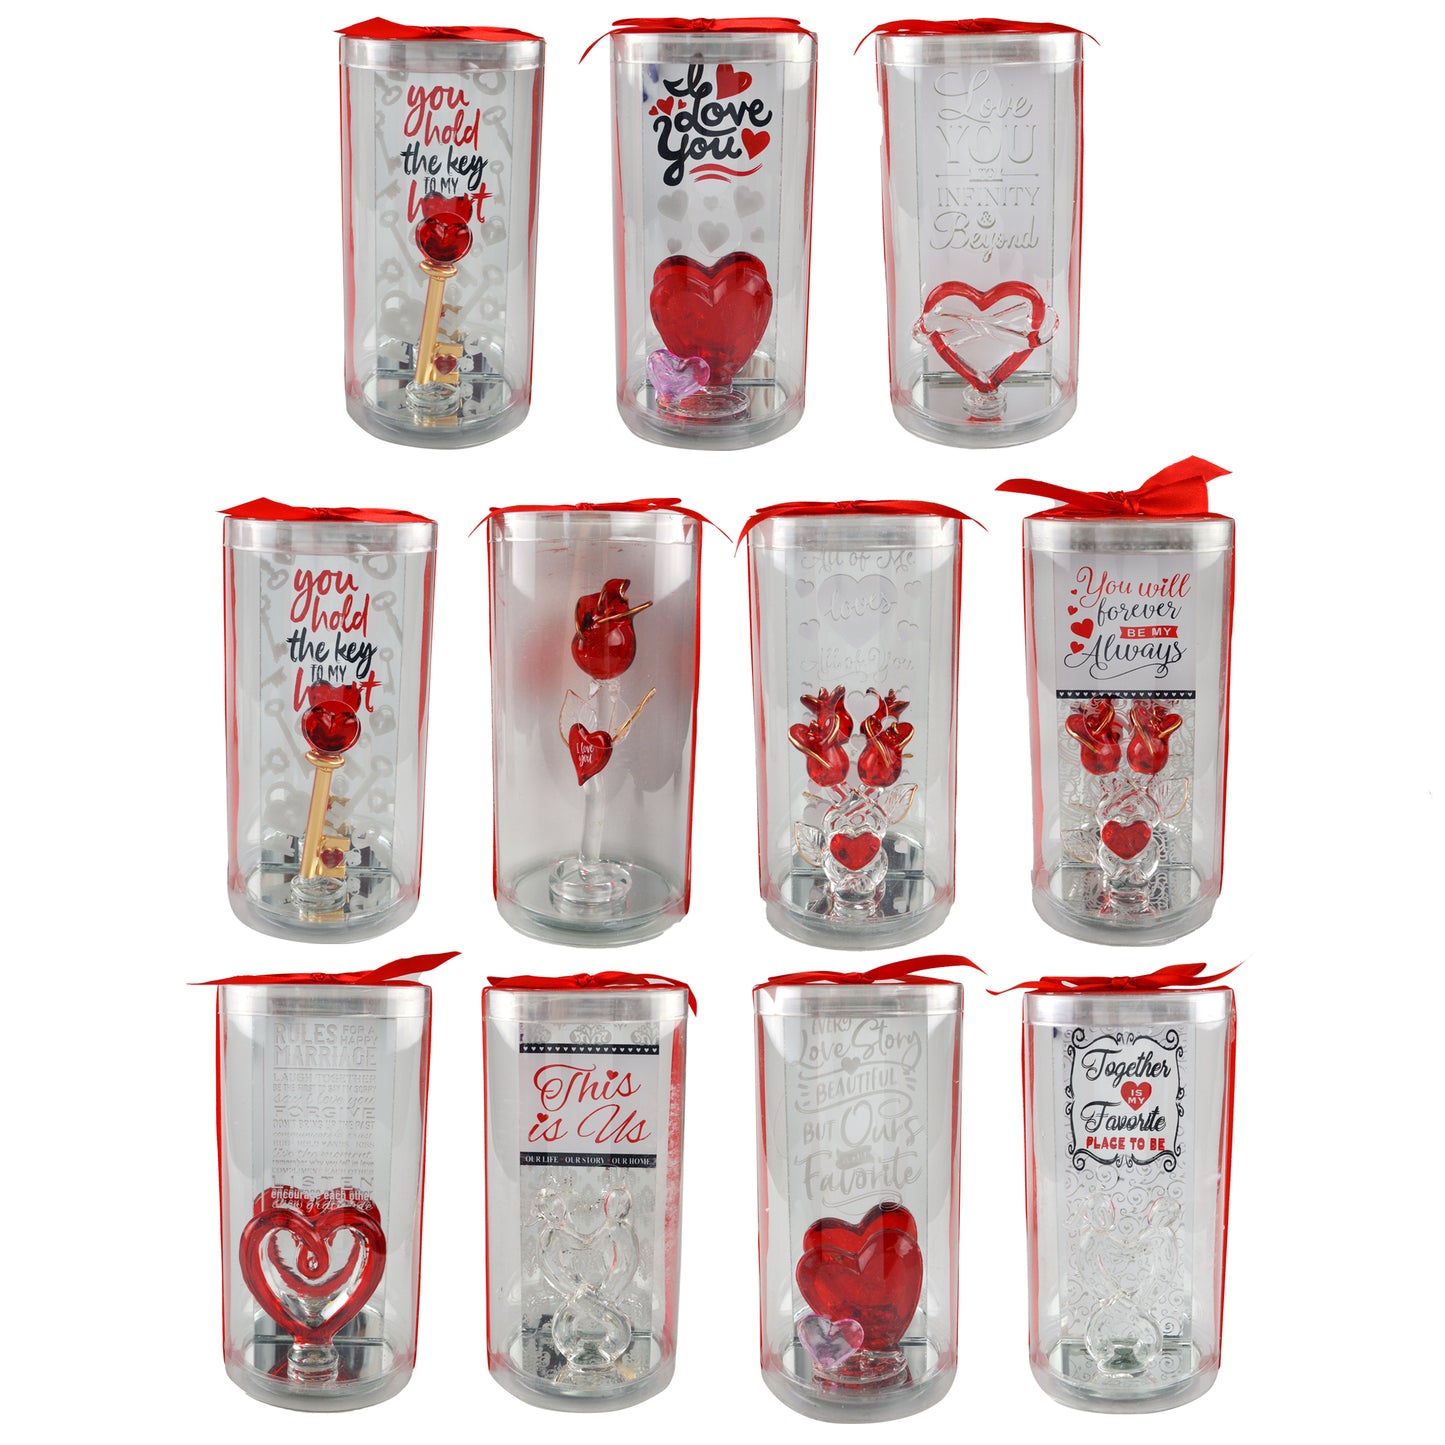 ITEM NUMBER 022821L VDAY GLASS - STORE SURPLUS NO DISPLAY 12 PIECES PER PACK